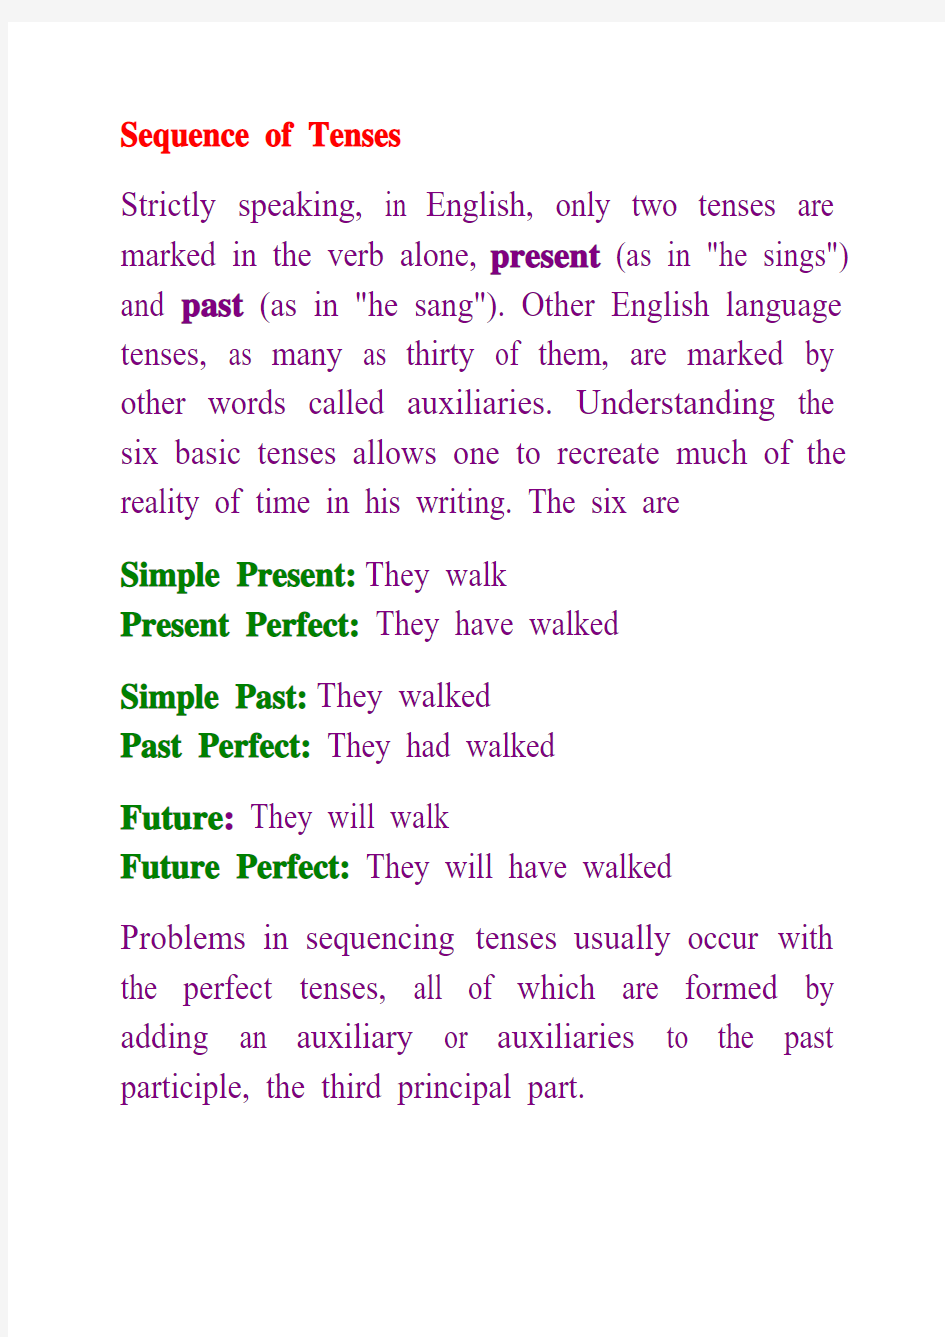 3 Sequence of Tenses